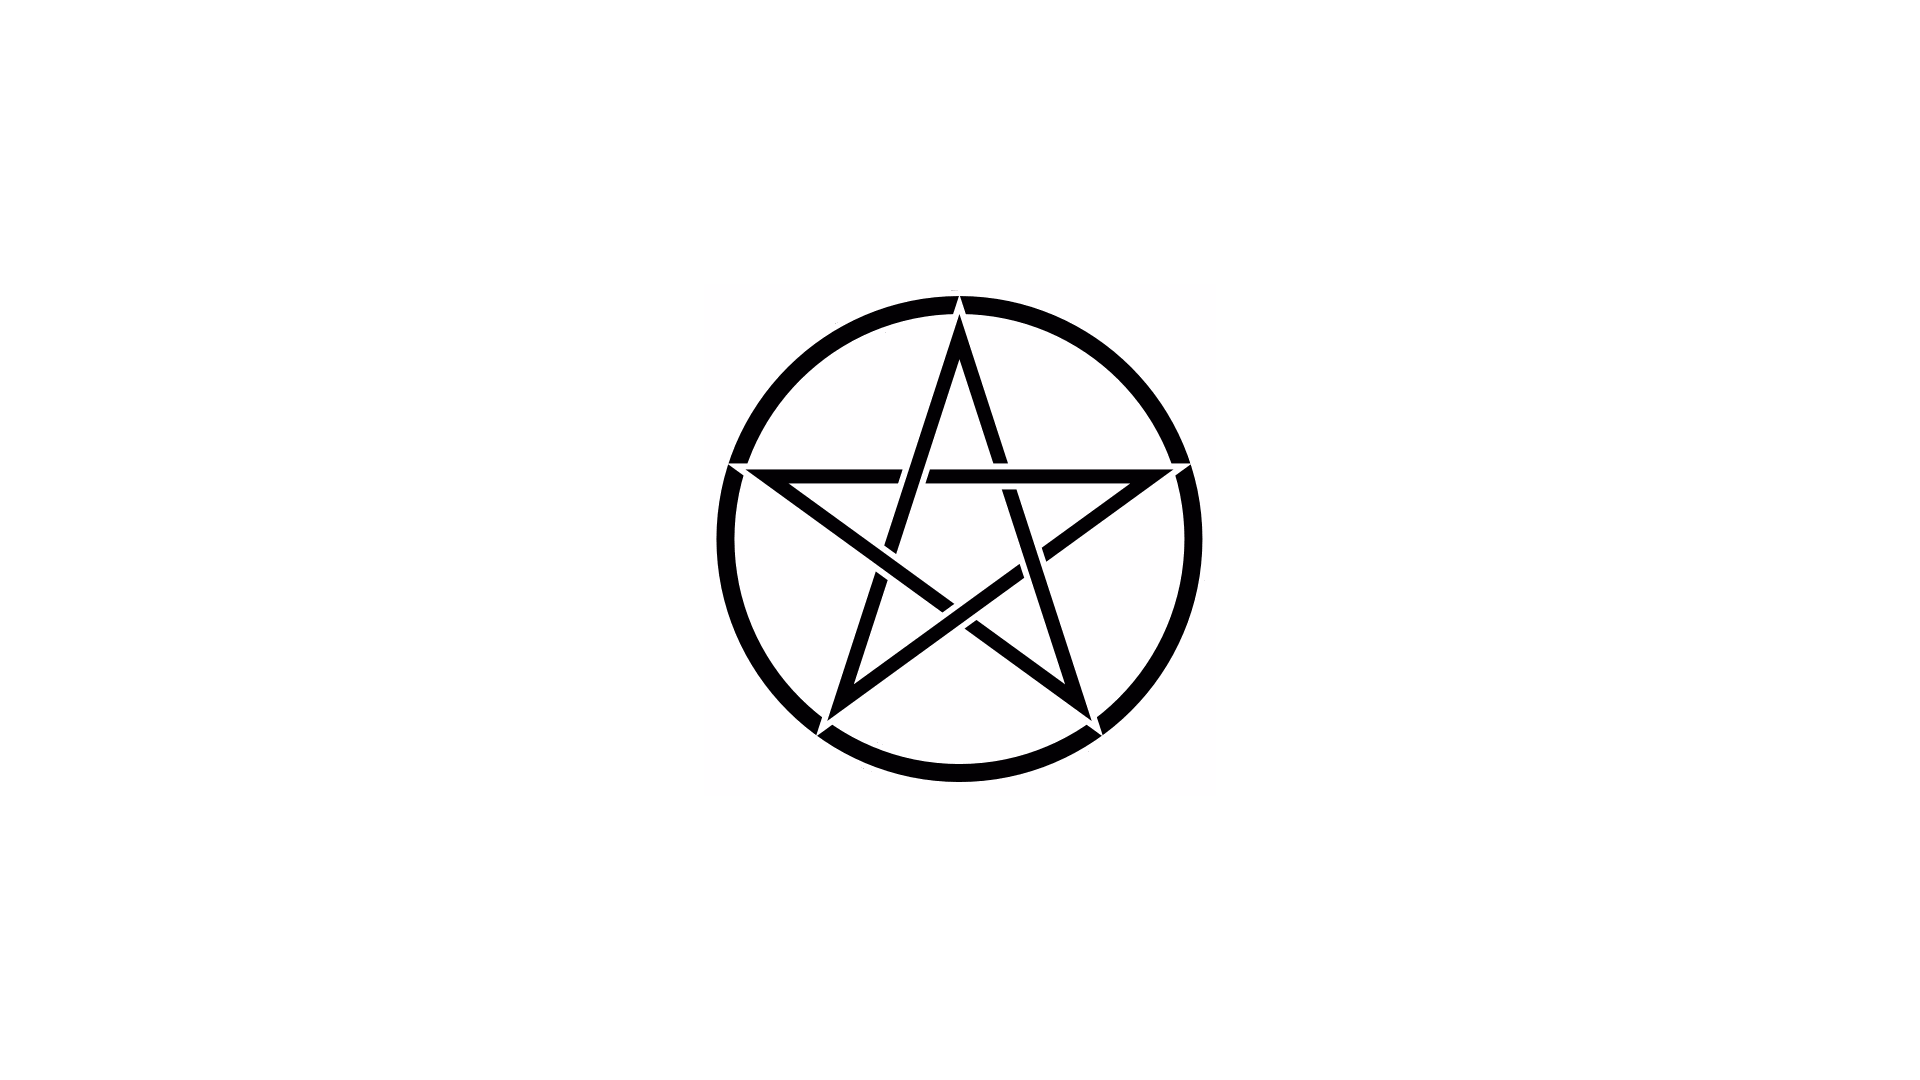 General 1920x1080 Pentacle Wicca pagan Witchcraft satanic digital art simple background